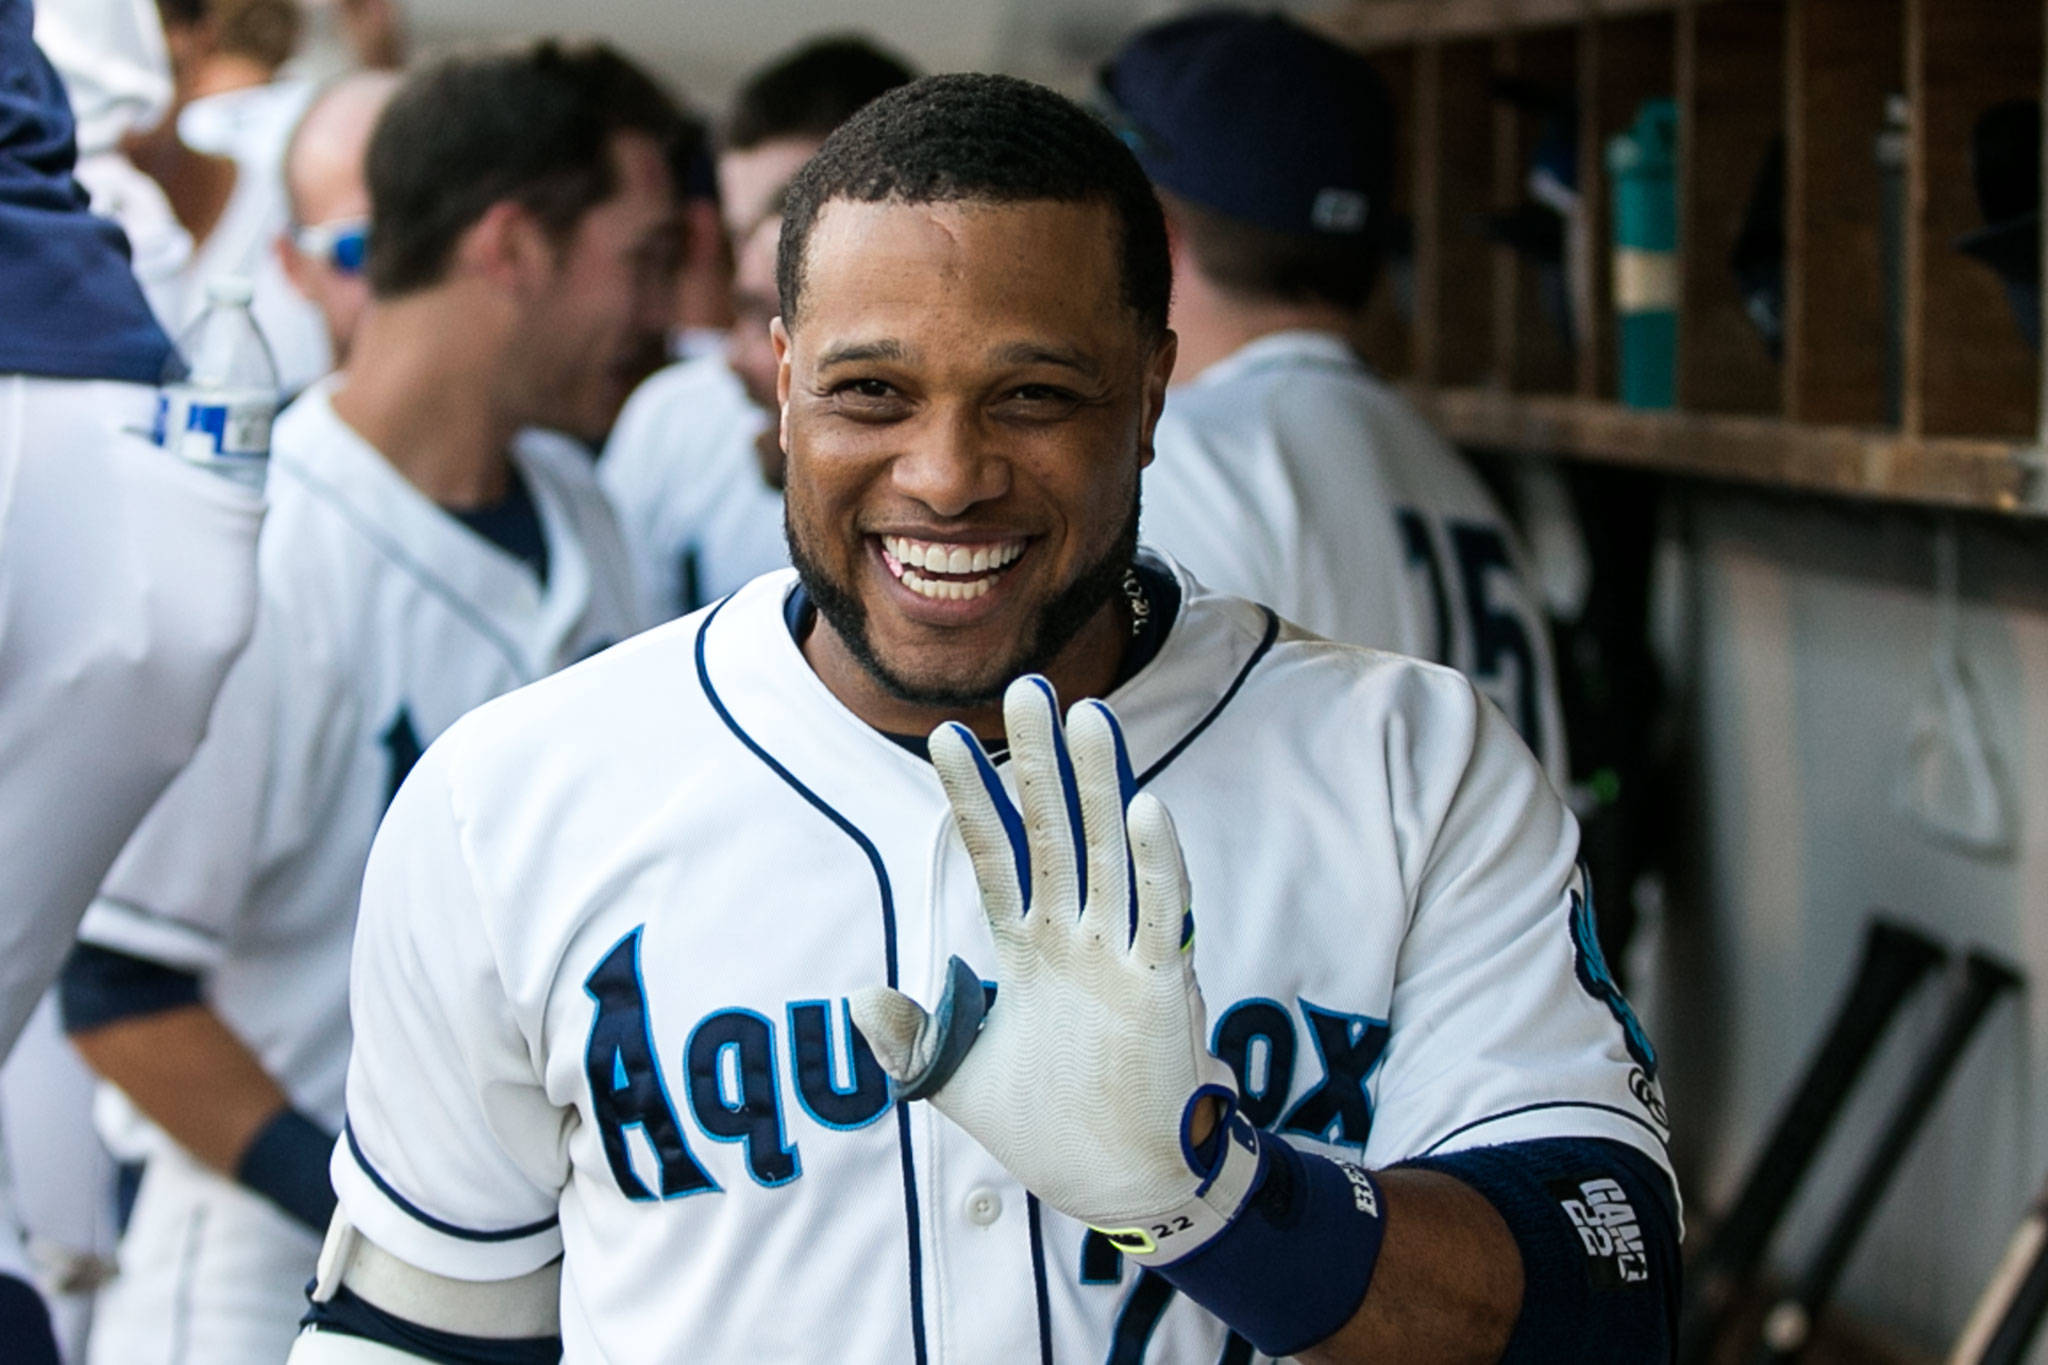 Mariners slugger Robinson Cano, on a rehab assignment with the AquaSox, celebrates his home run in the third inning against the Emeralds on Thursday at Everett Memorial Stadium. (Kevin Clark / The Herald)